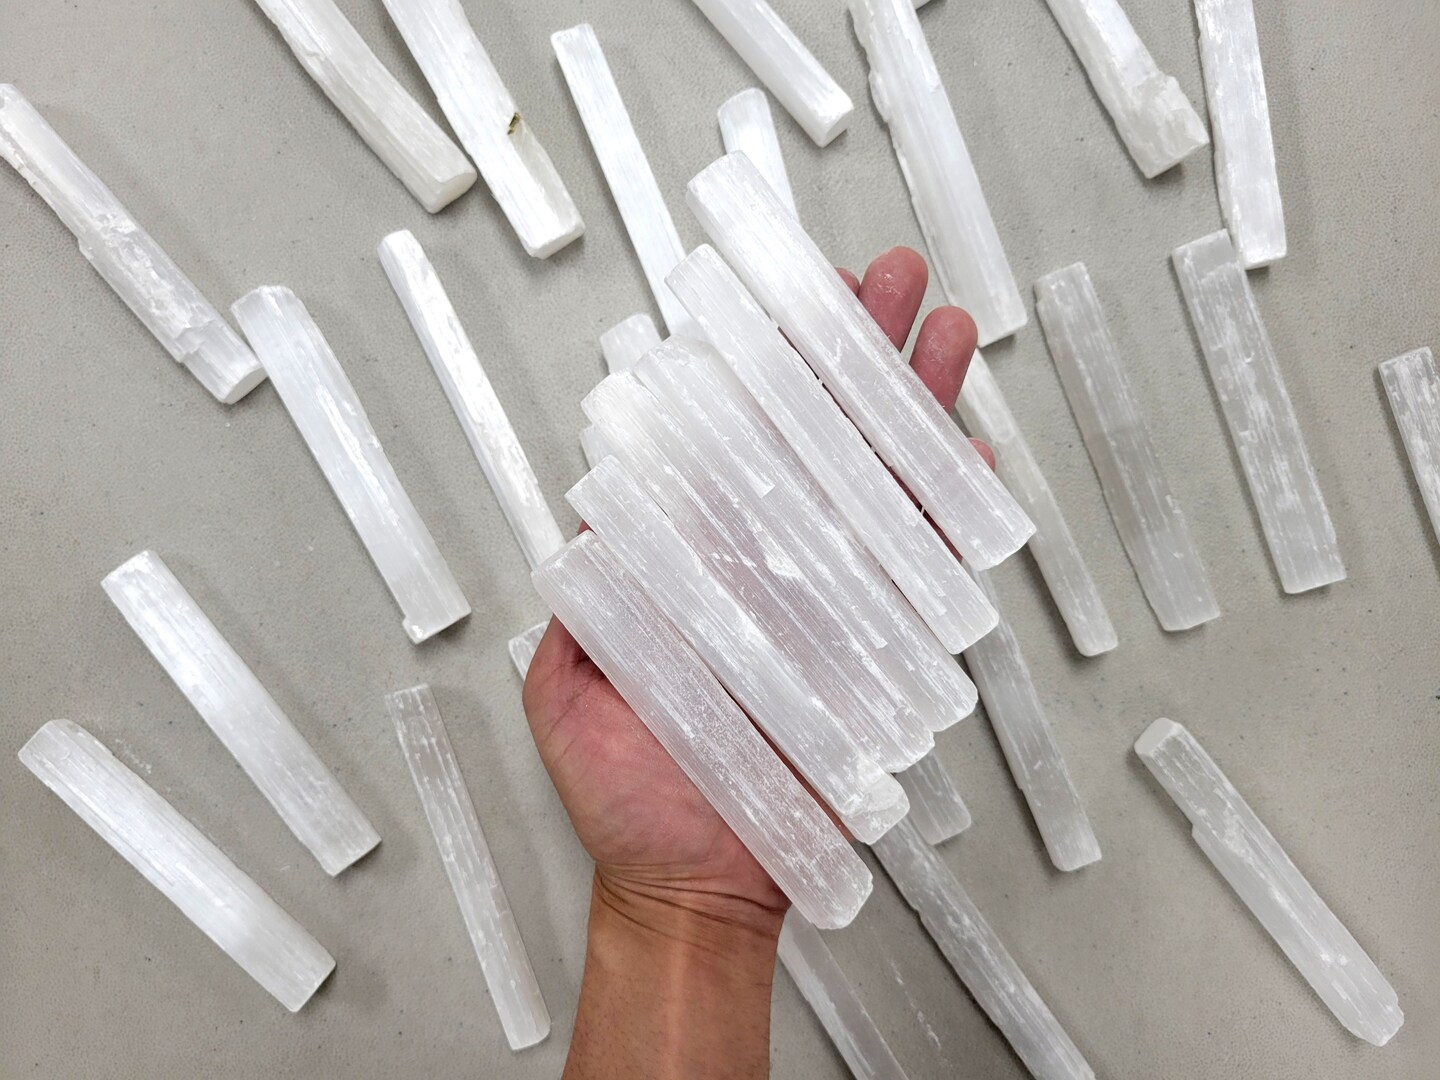 5 INCH Selenite Crystal Sticks for Crystal Healing &#x26; Crafting